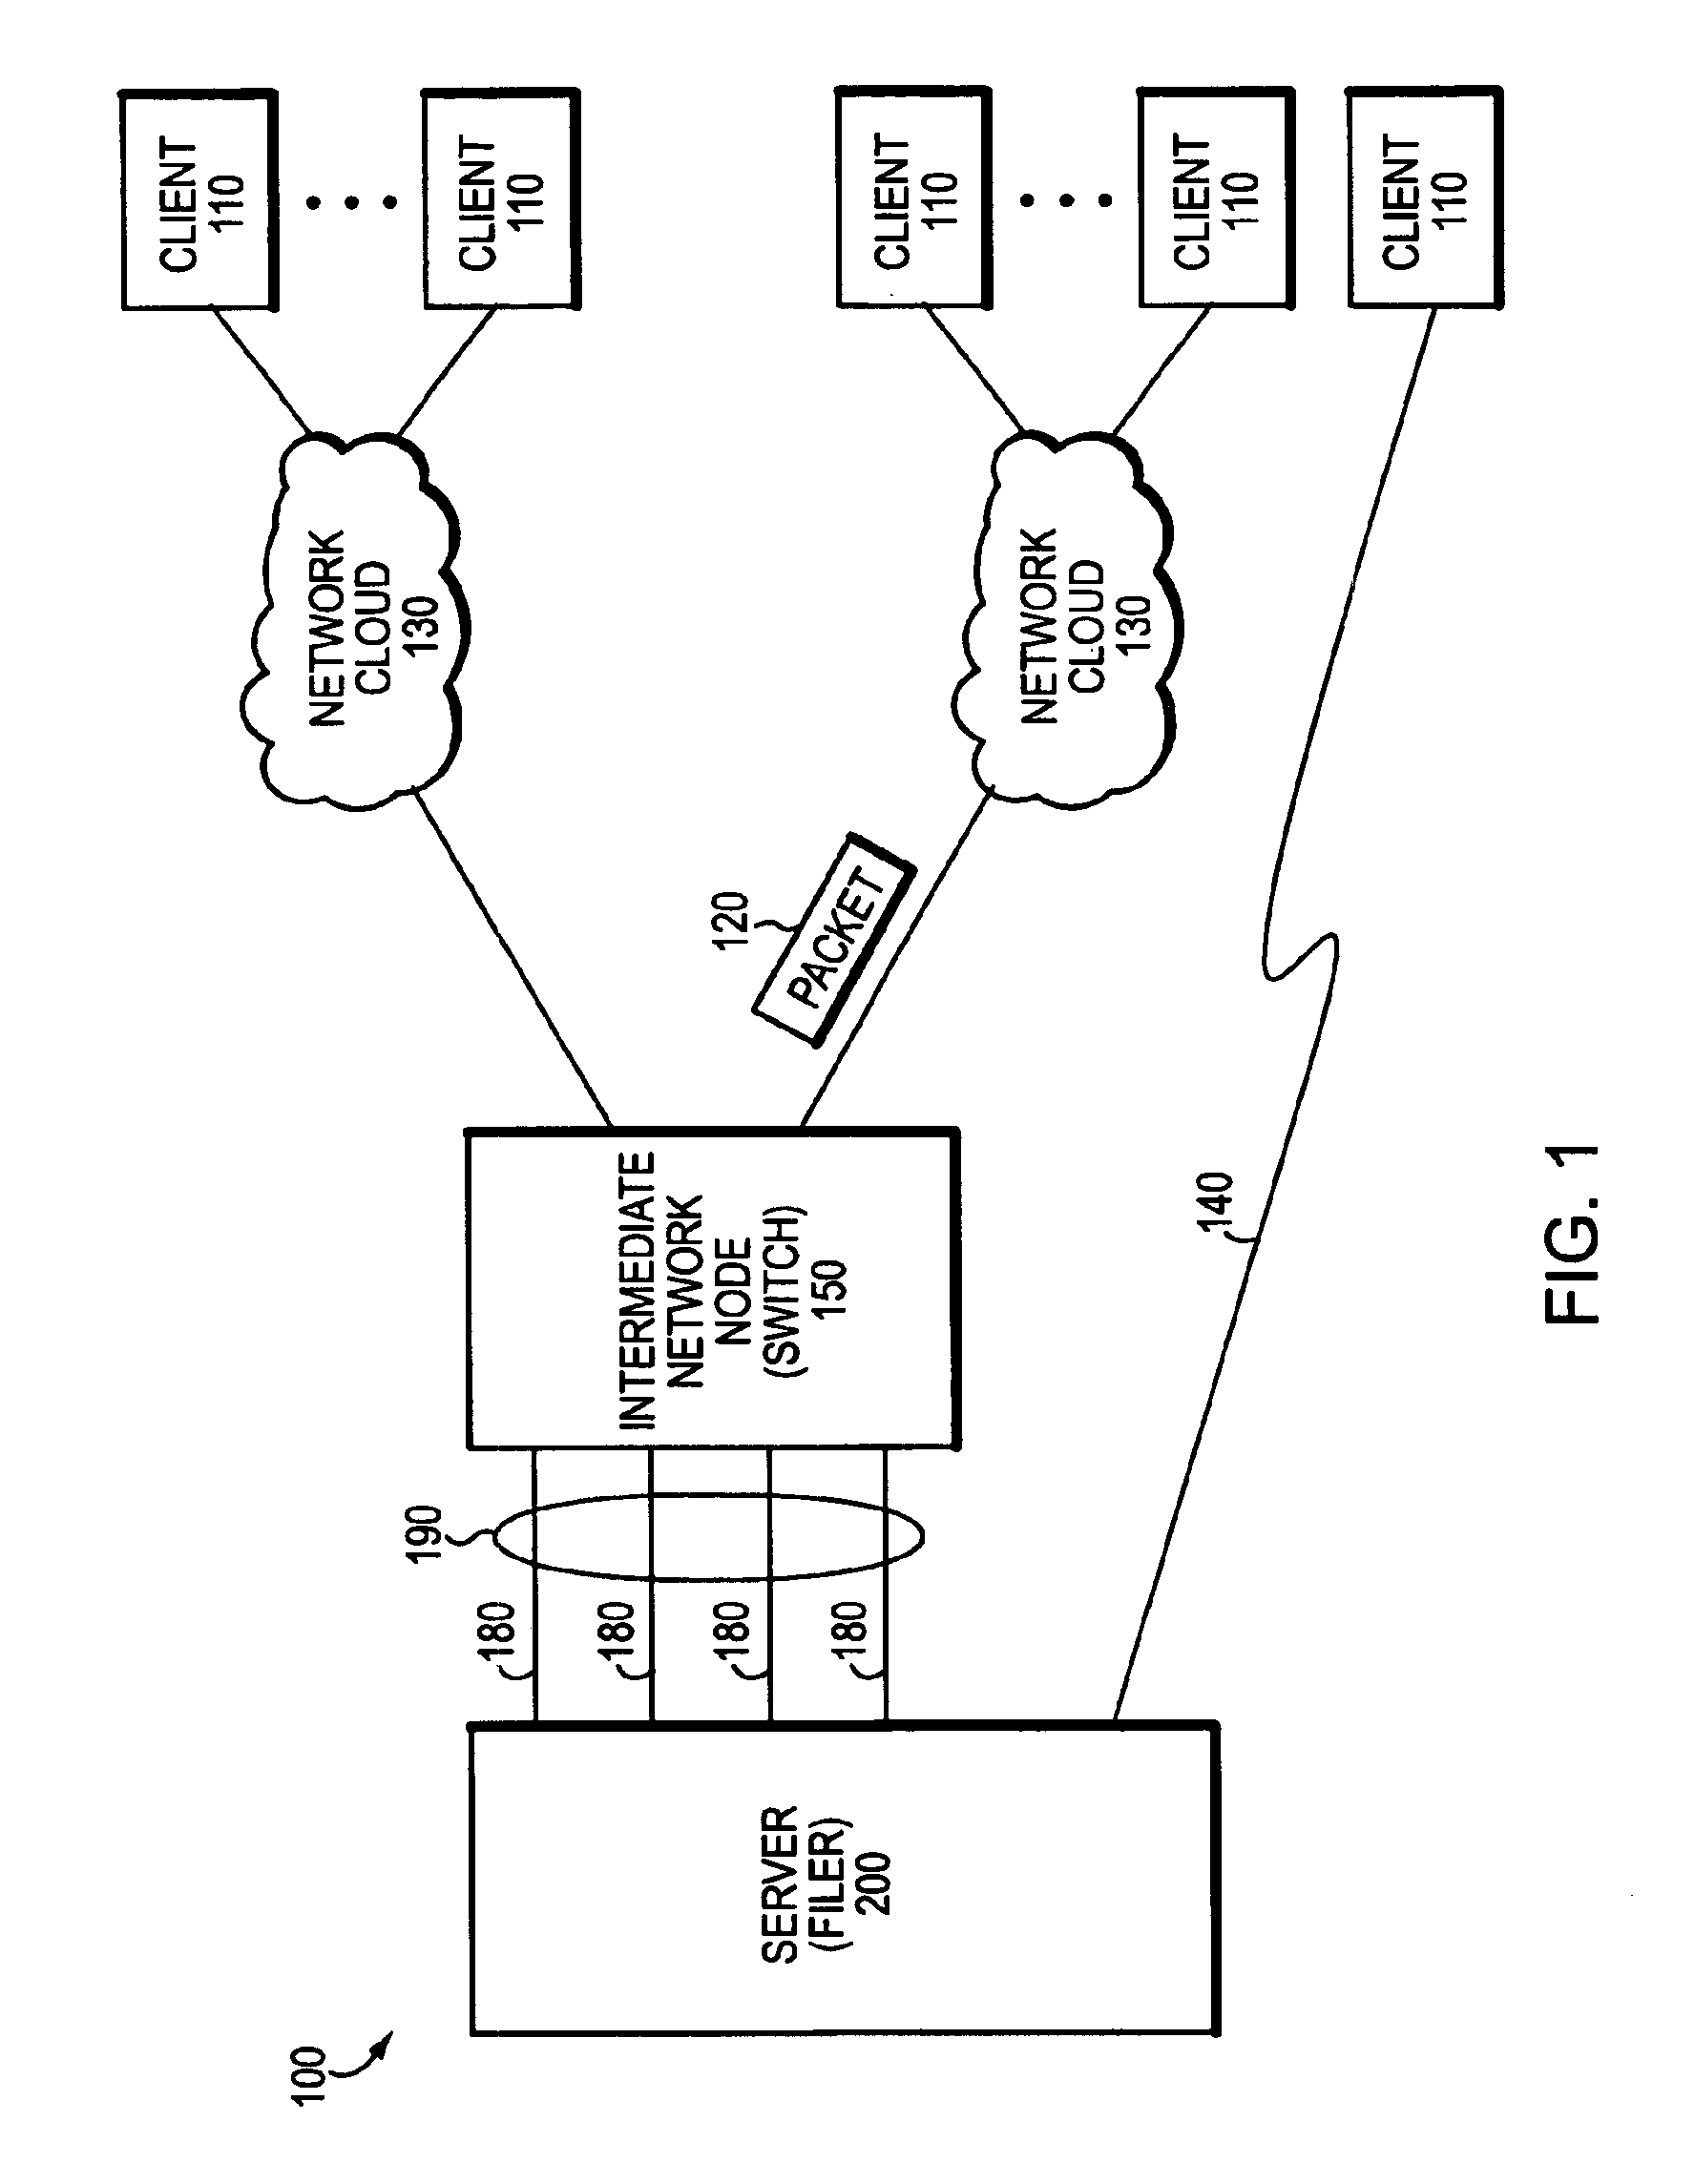 Technique for enabling multiple virtual filers on a single filer to participate in multiple address spaces with overlapping network addresses